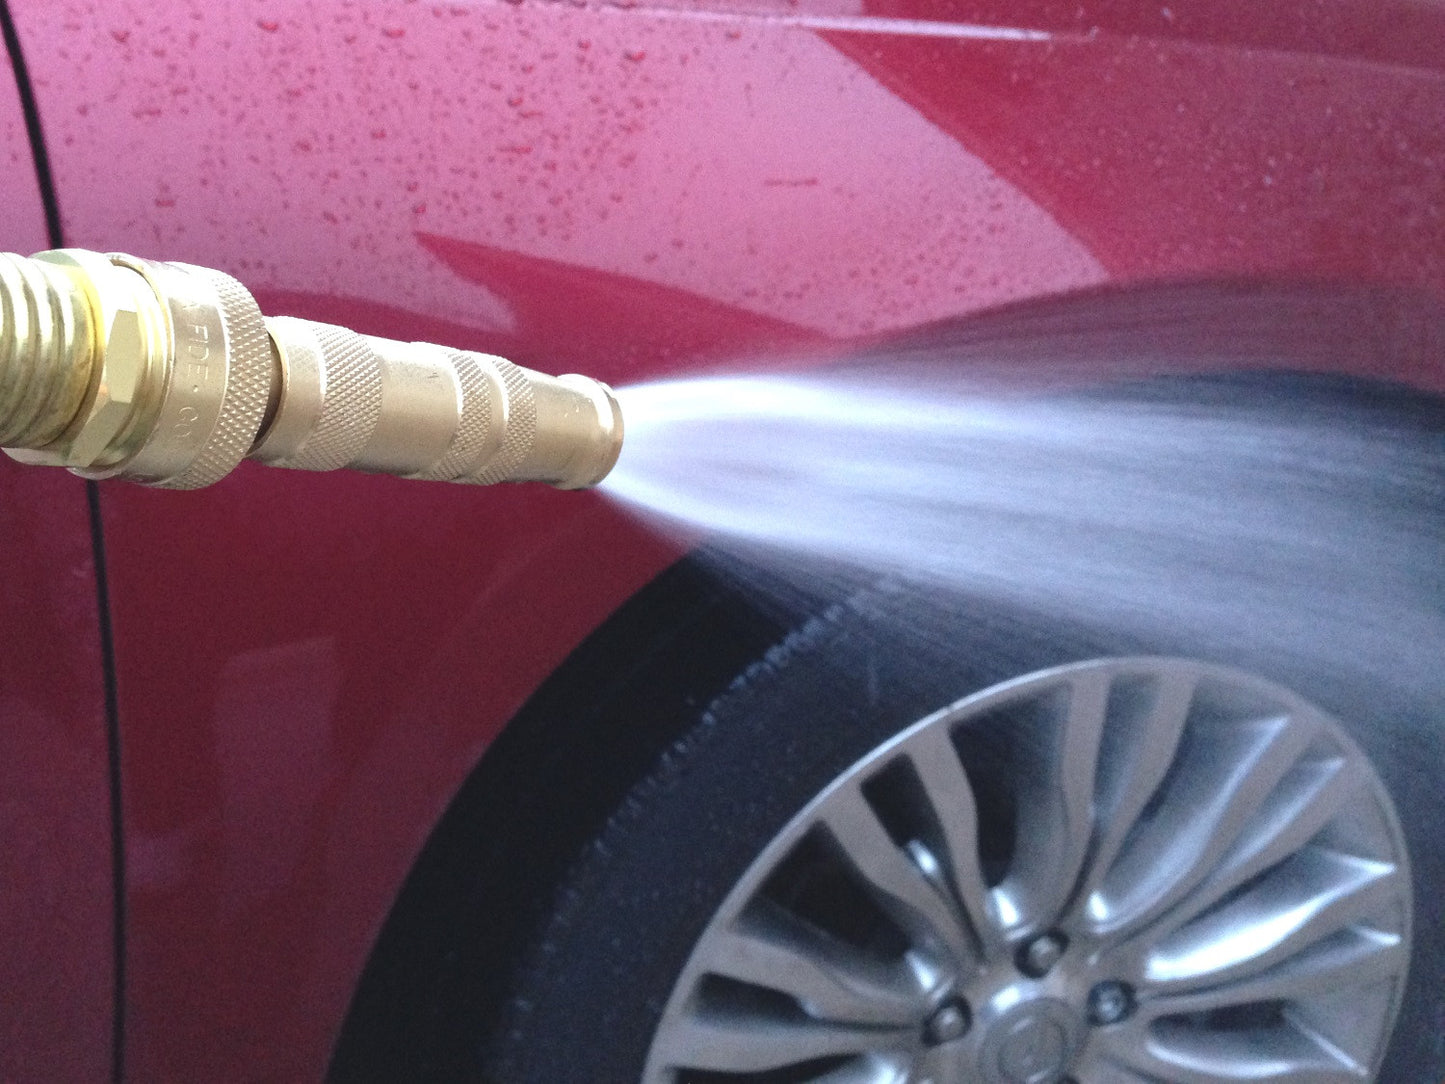 Hose Nozzle High Pressure - Lead-Free Brass for Car or Garden - Best Hose Nozzle - Solid Brass Fittings - Lifetime Guarantee - Adjustable Water Sprayer From Spray to Jet - Heavy Duty - Fits Standard Hoses - With Gardening Secret E-book - Single Pack